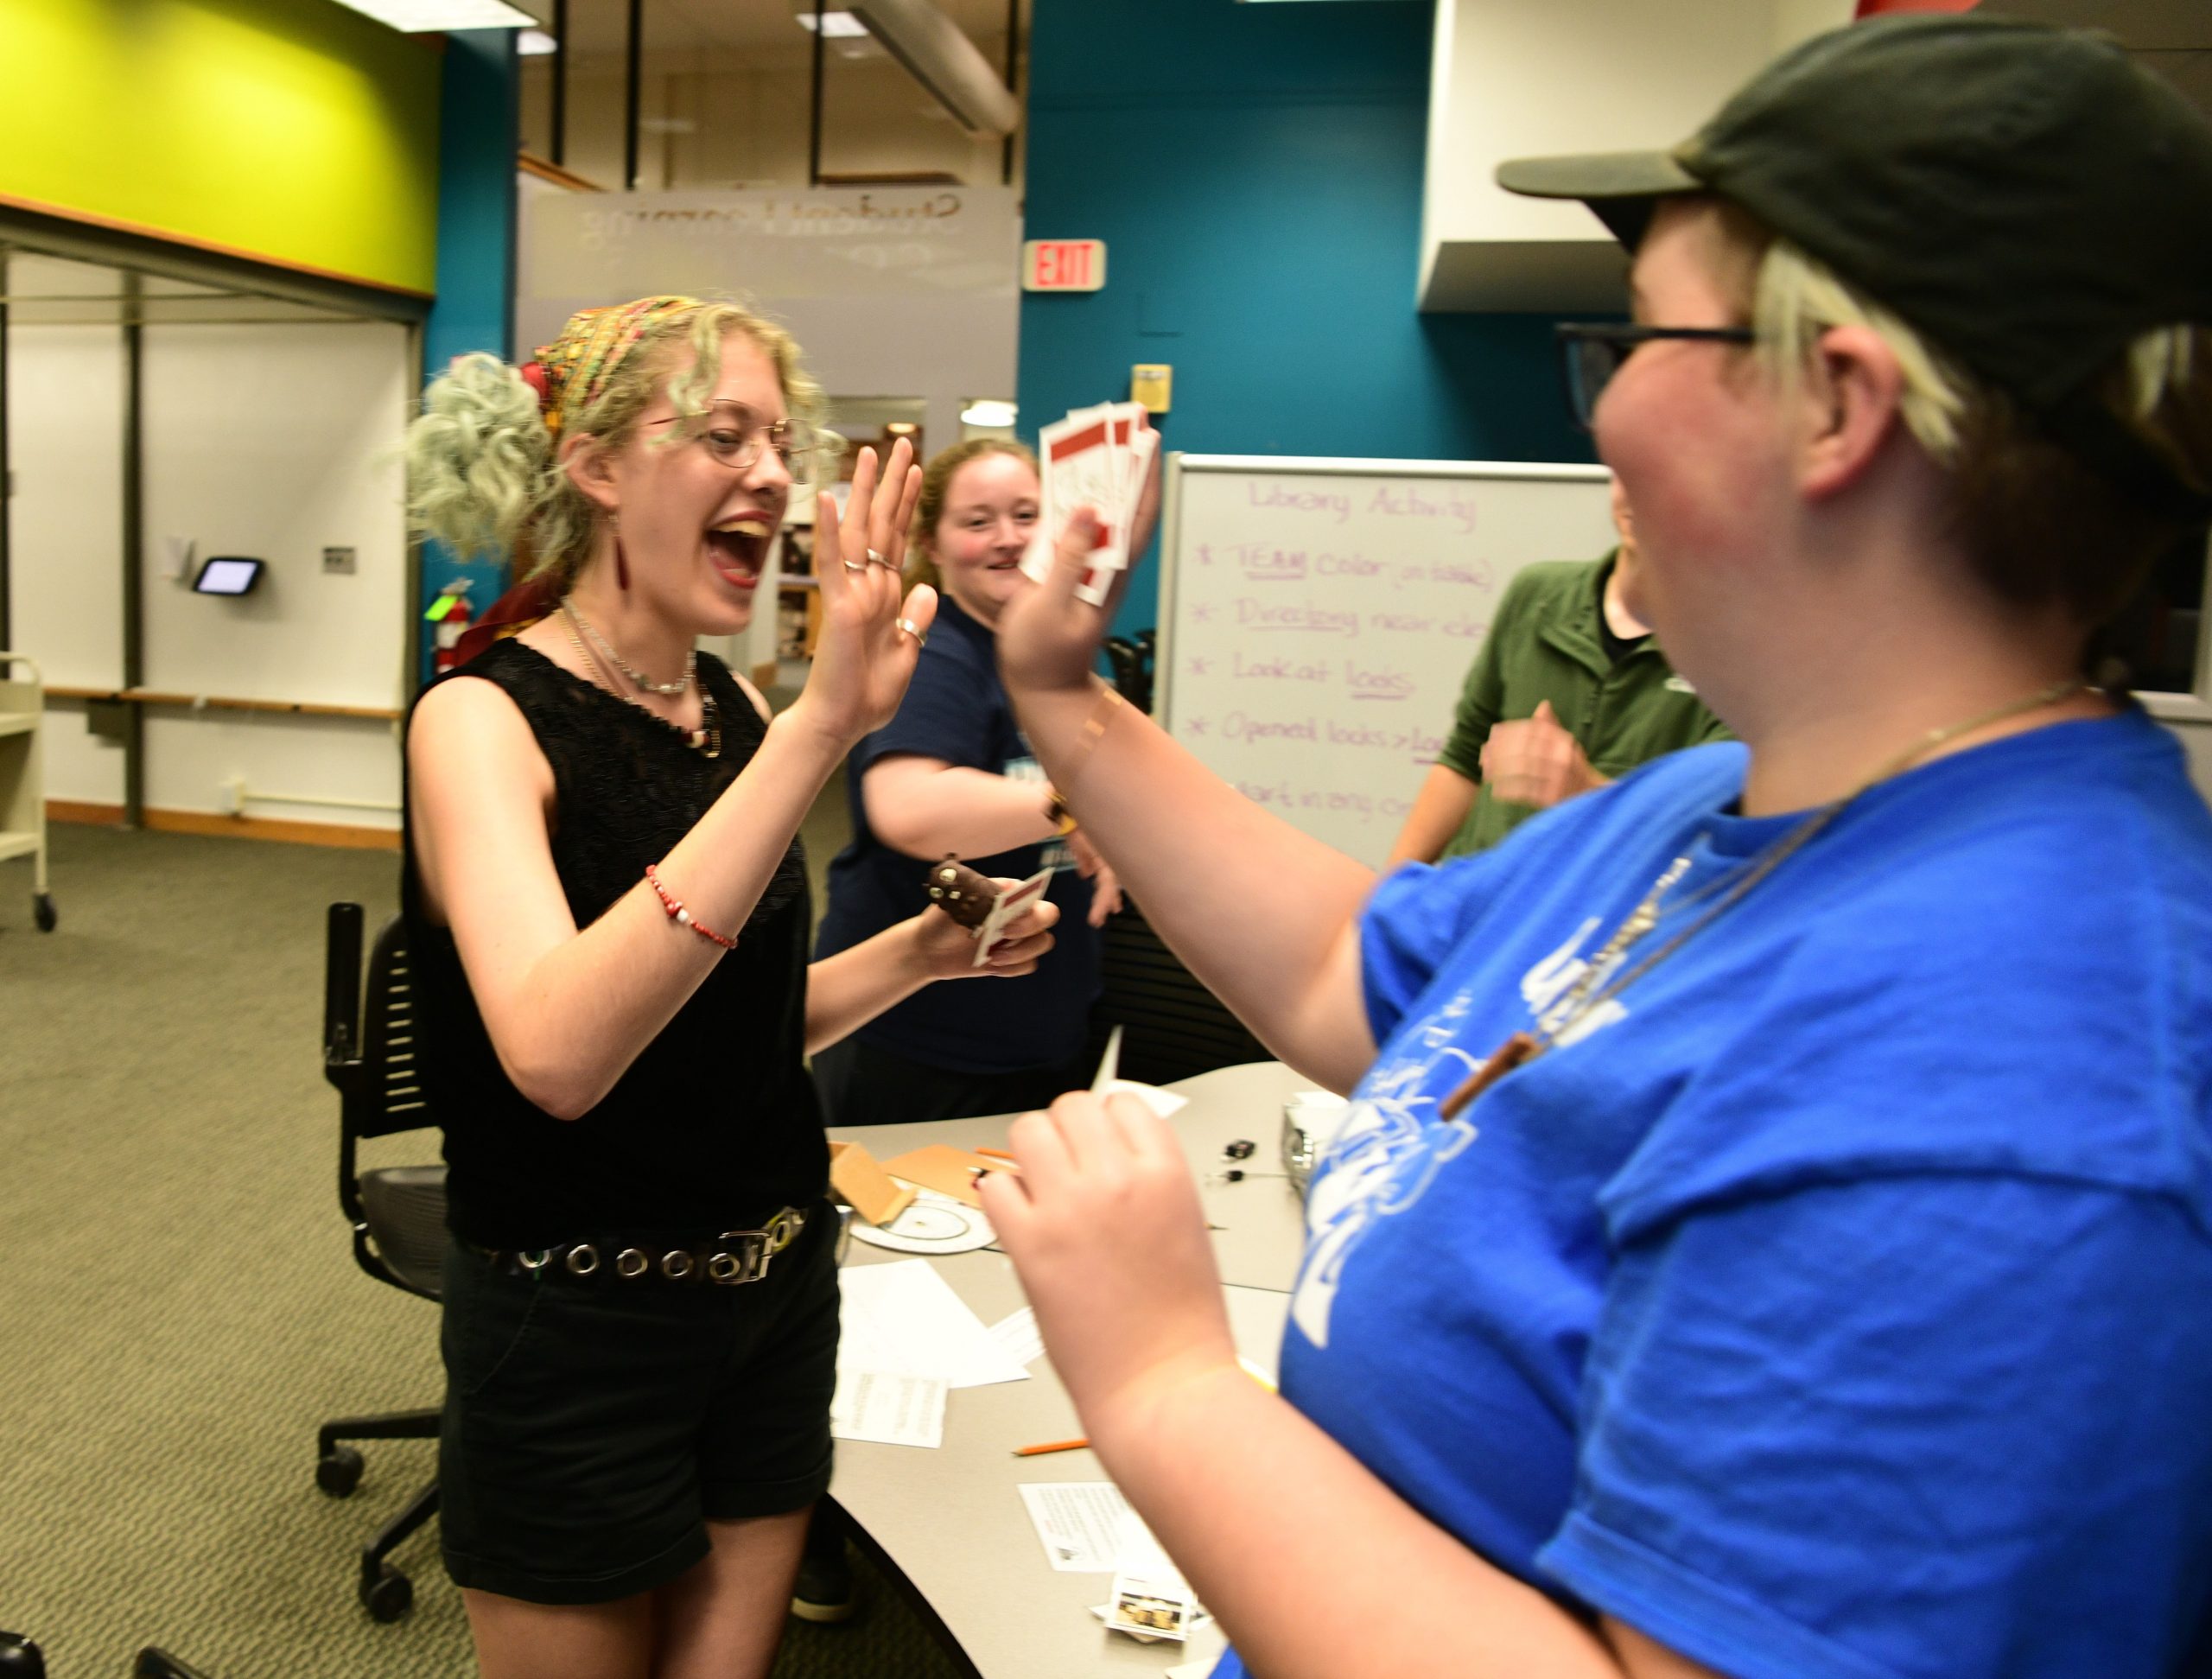 Students sharing a high-five in the student learning commons